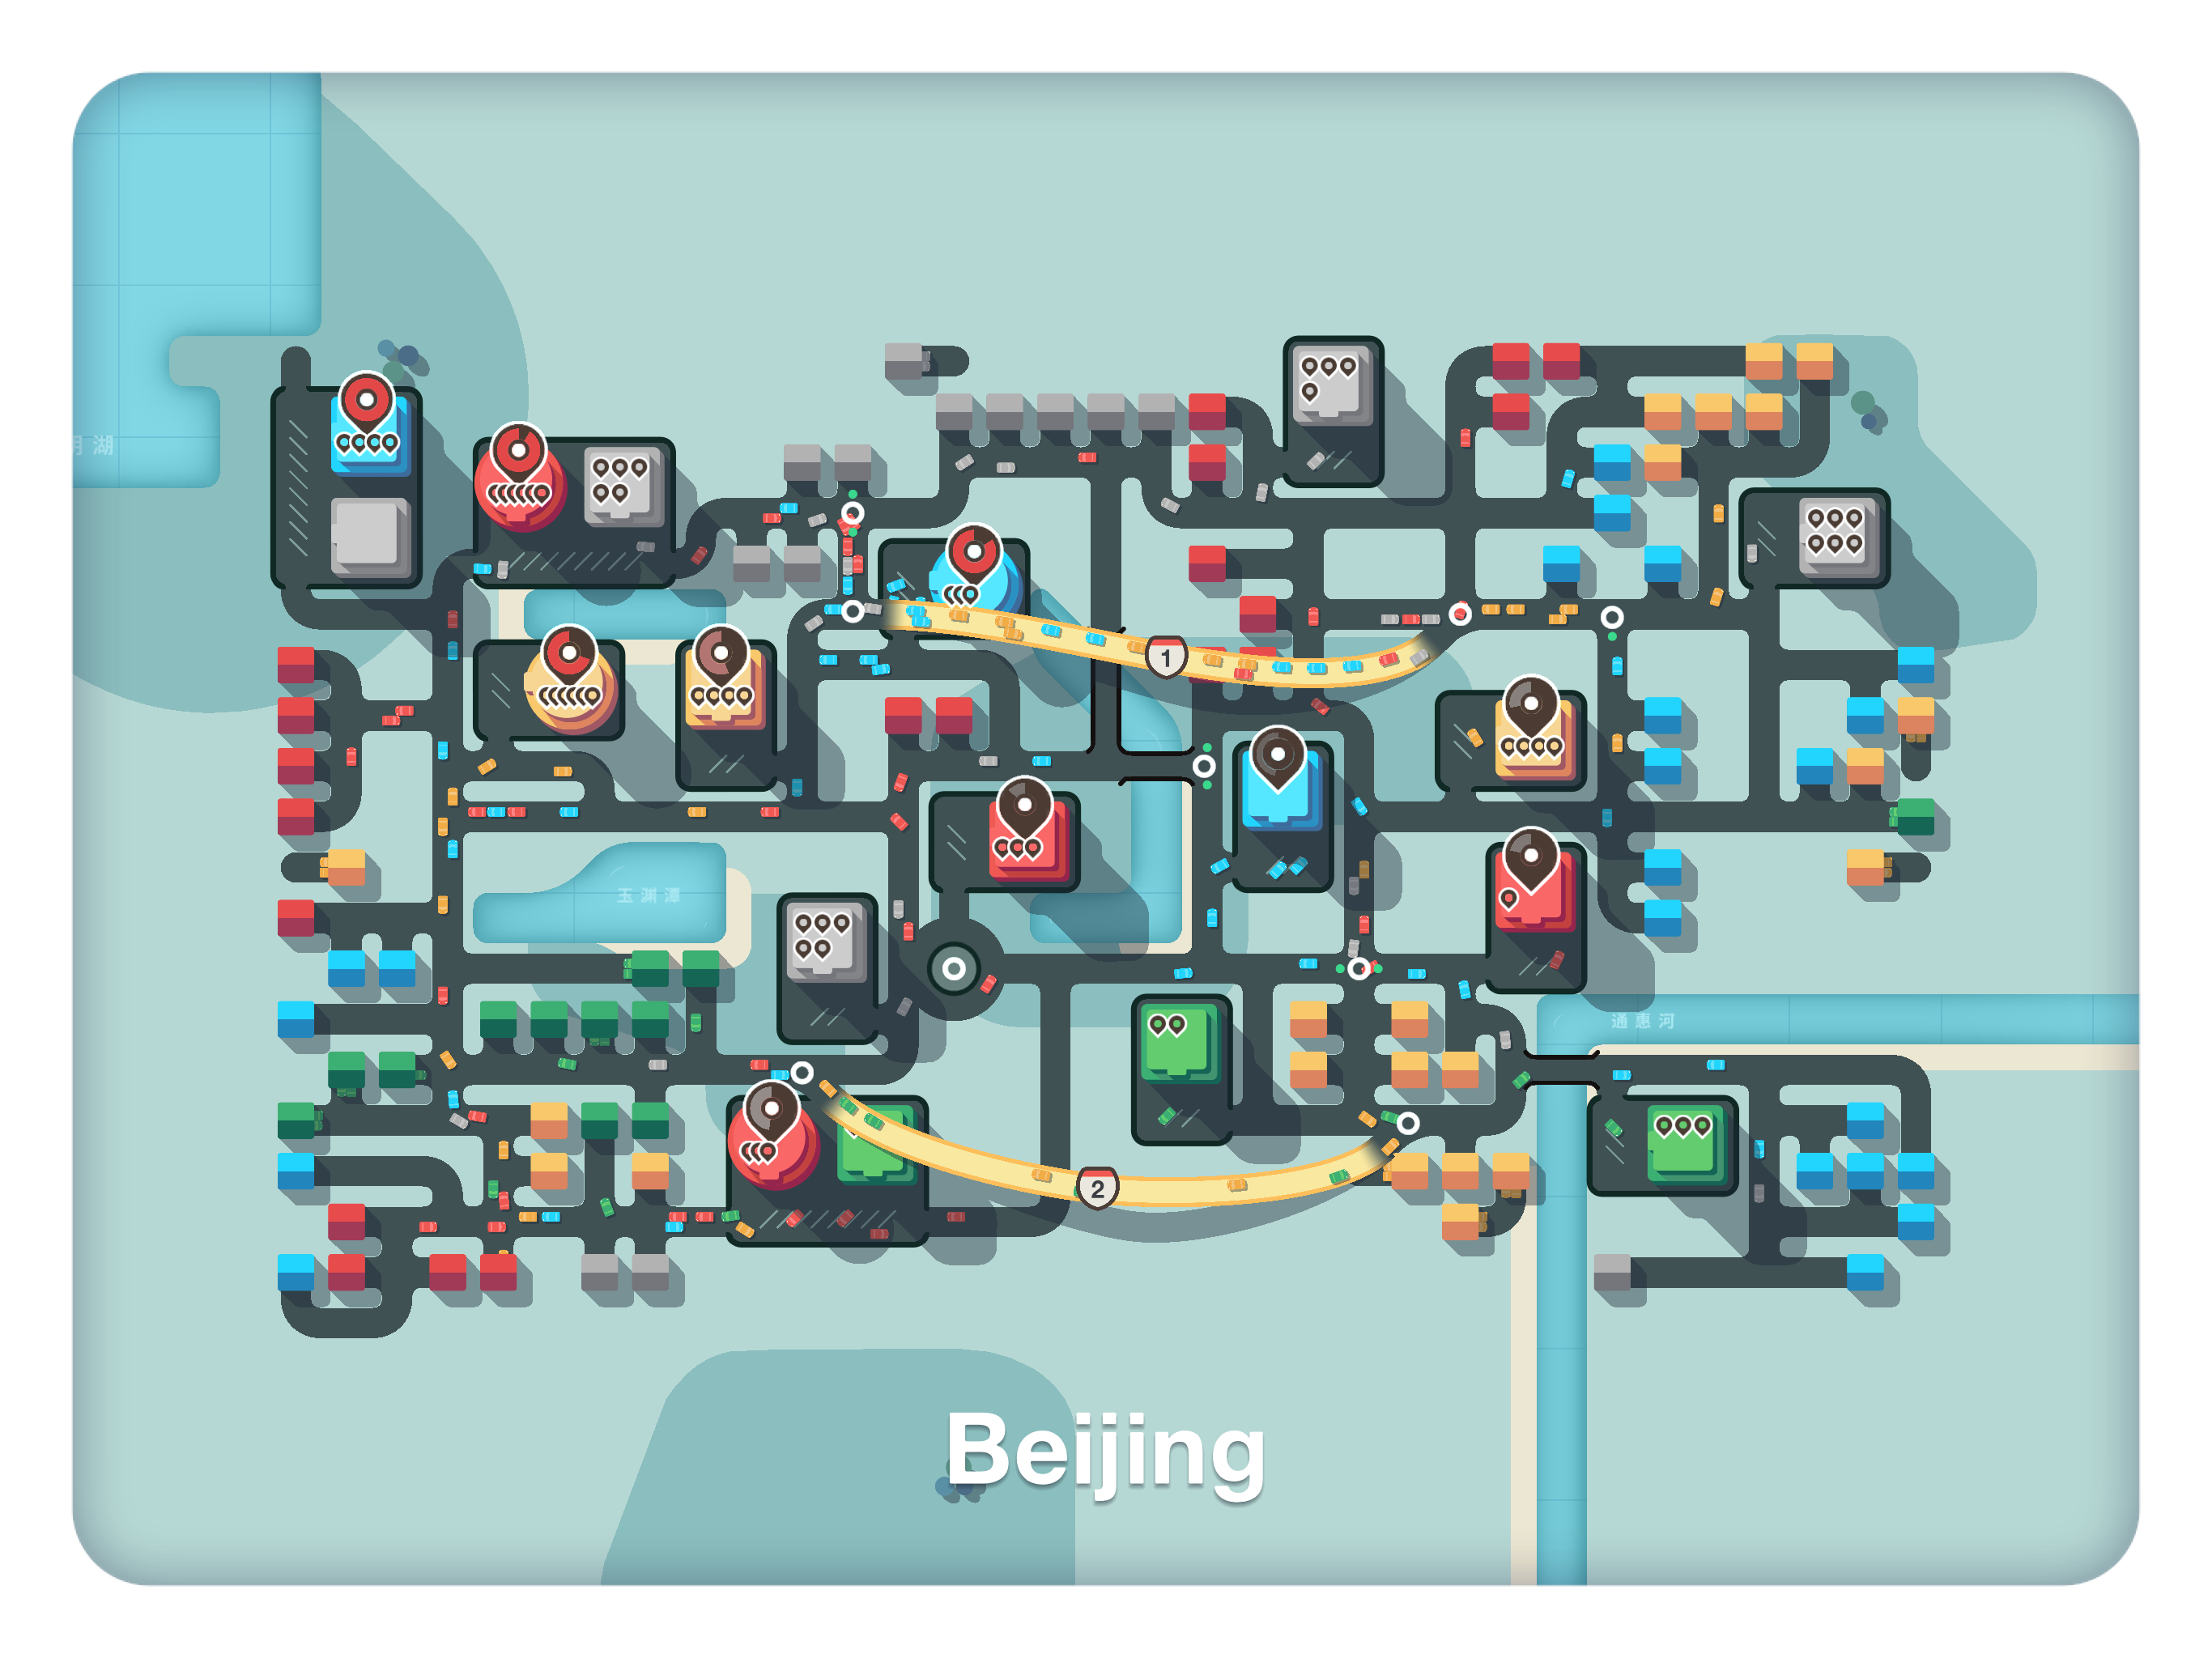 Game screenshot showing a mess of roads and traffic for Beijing. All roads are drawn in 90 degree angles.